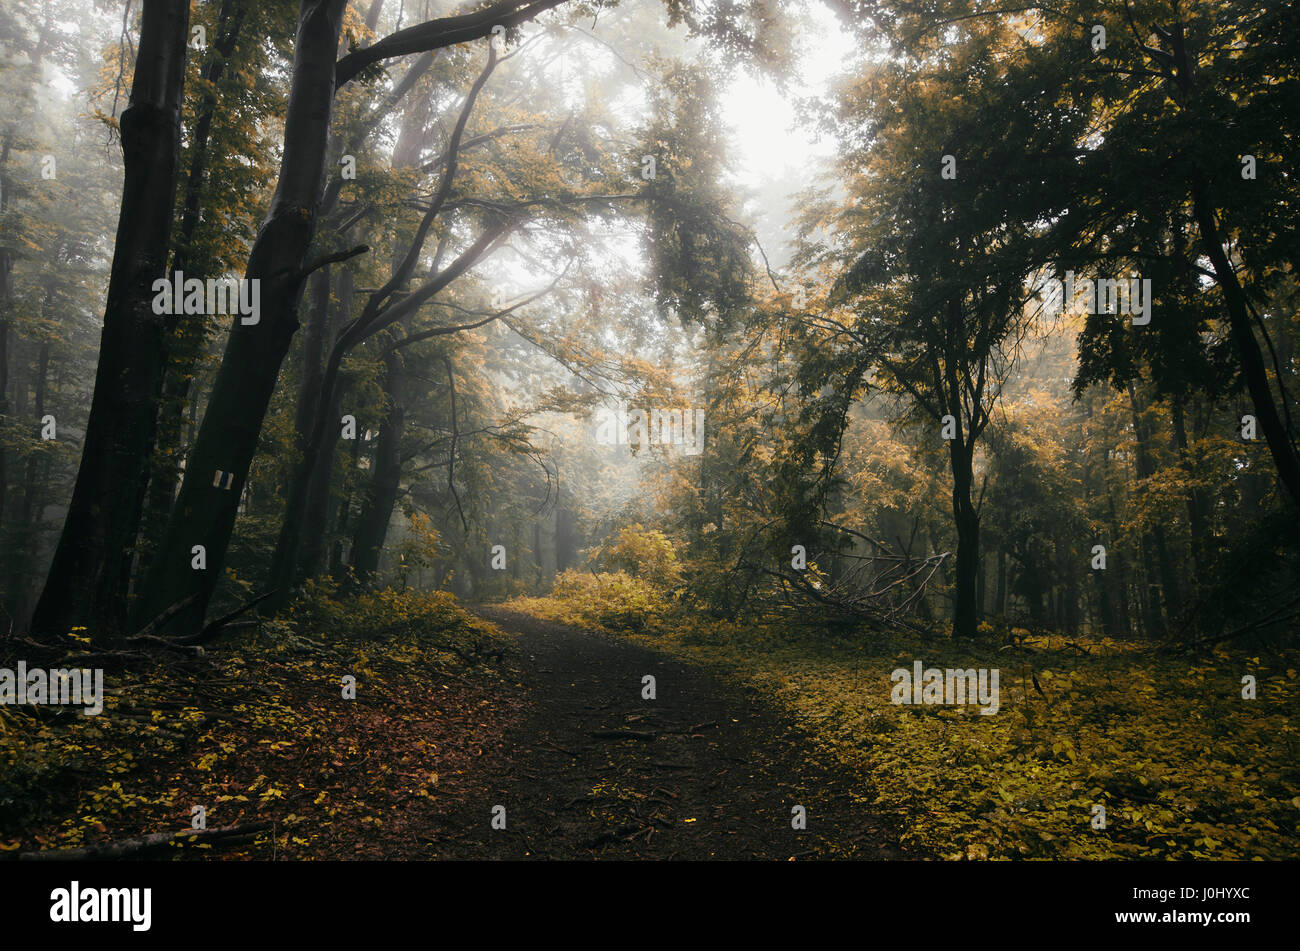 autumn forest path landscape with misty rainy weather Stock Photo